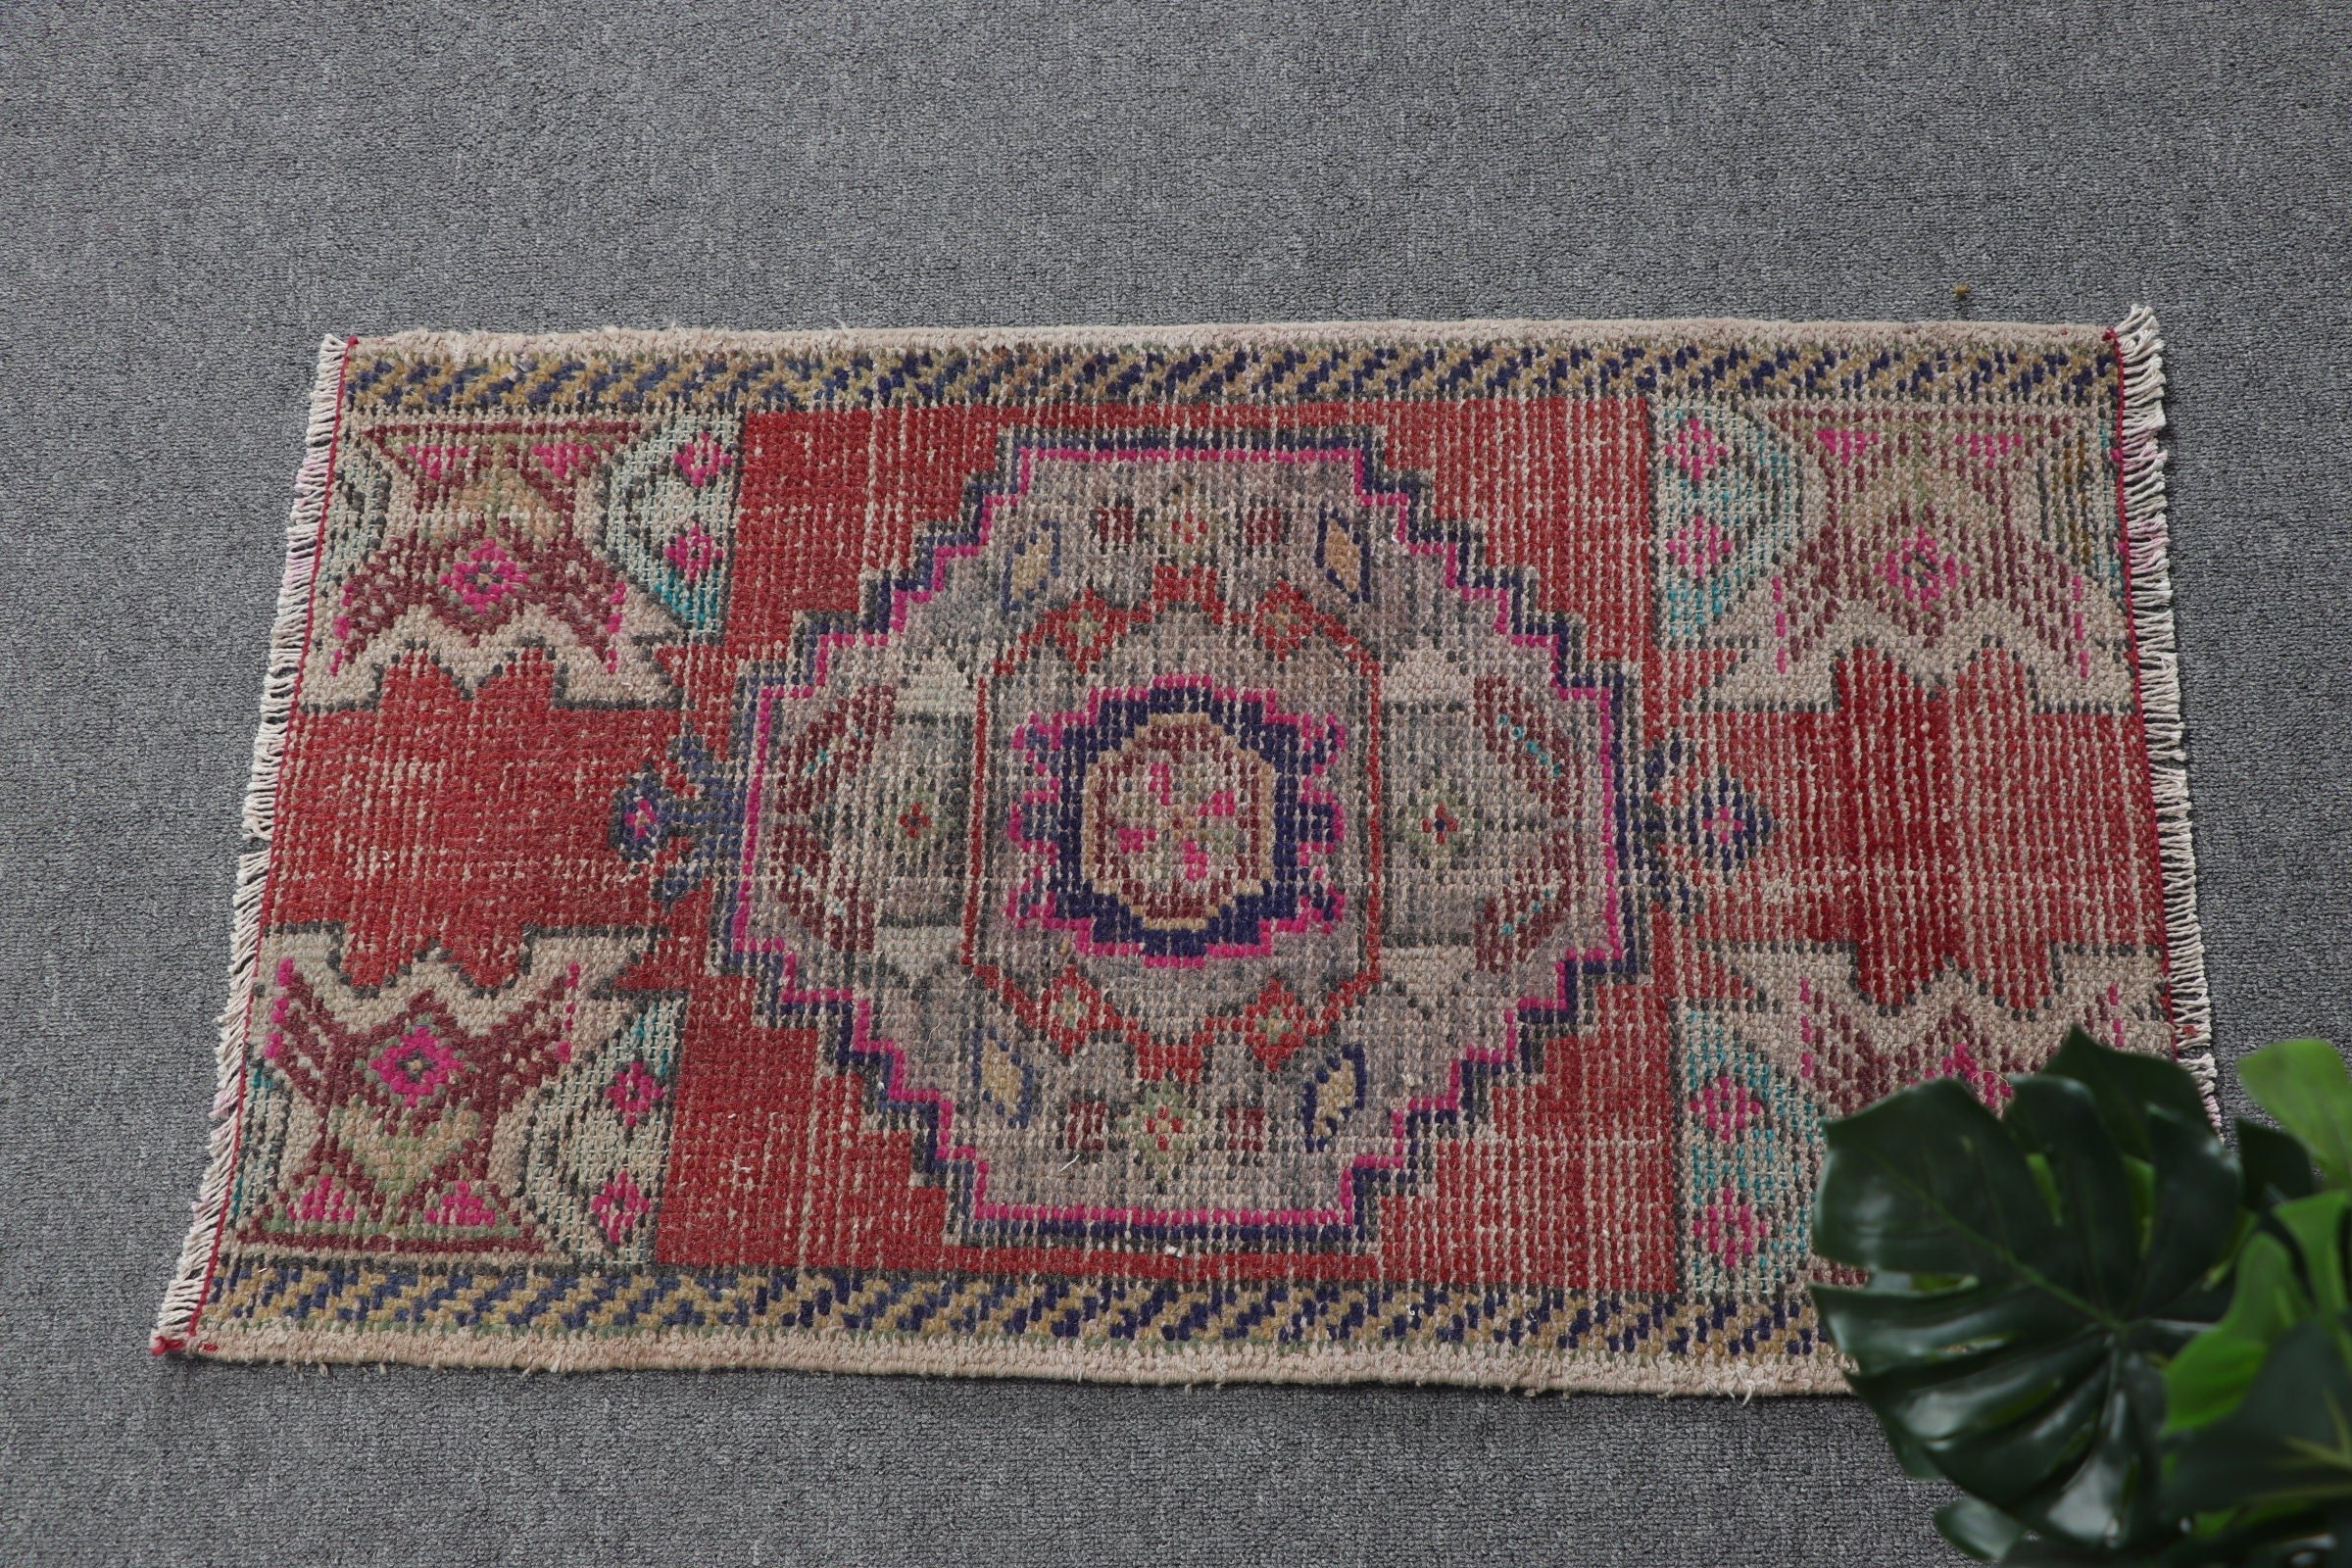 Red Anatolian Rugs, Nursery Rug, Kitchen Rugs, Turkish Rug, Wool Rug, Rugs for Kitchen, 1.6x2.8 ft Small Rug, Vintage Rug